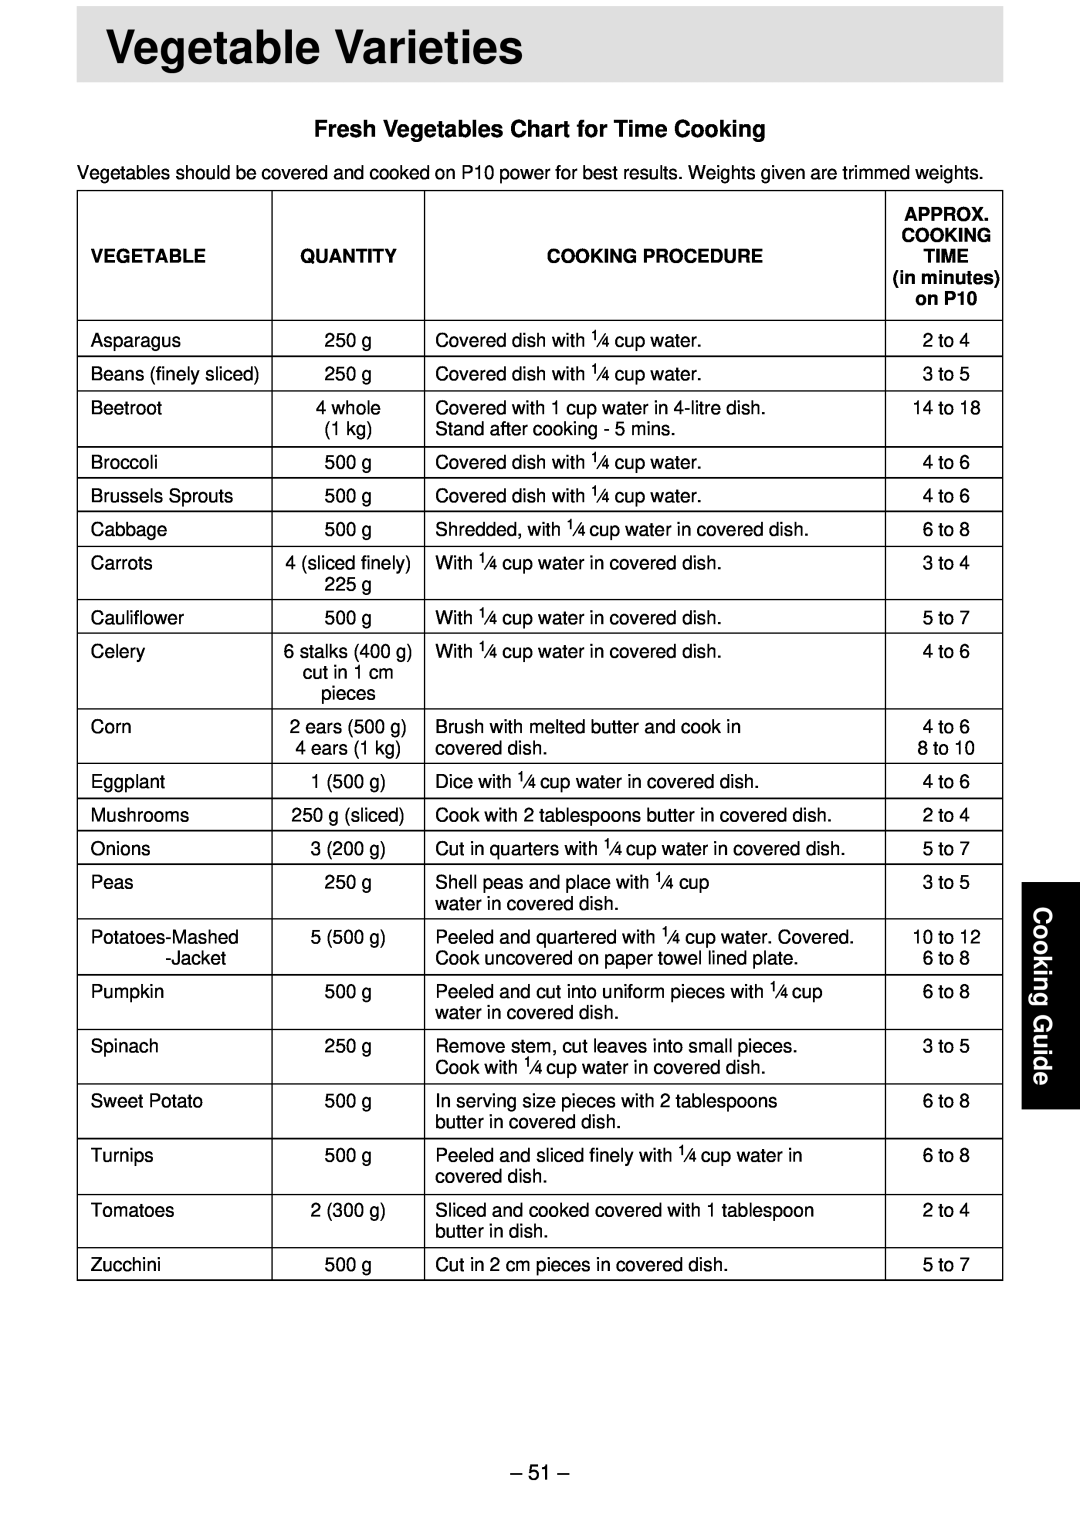 Panasonic NN-S781, NN-T791, NN-S761 Fresh Vegetables Chart for Time Cooking, Vegetable Varieties, Cooking Guide, in minutes 